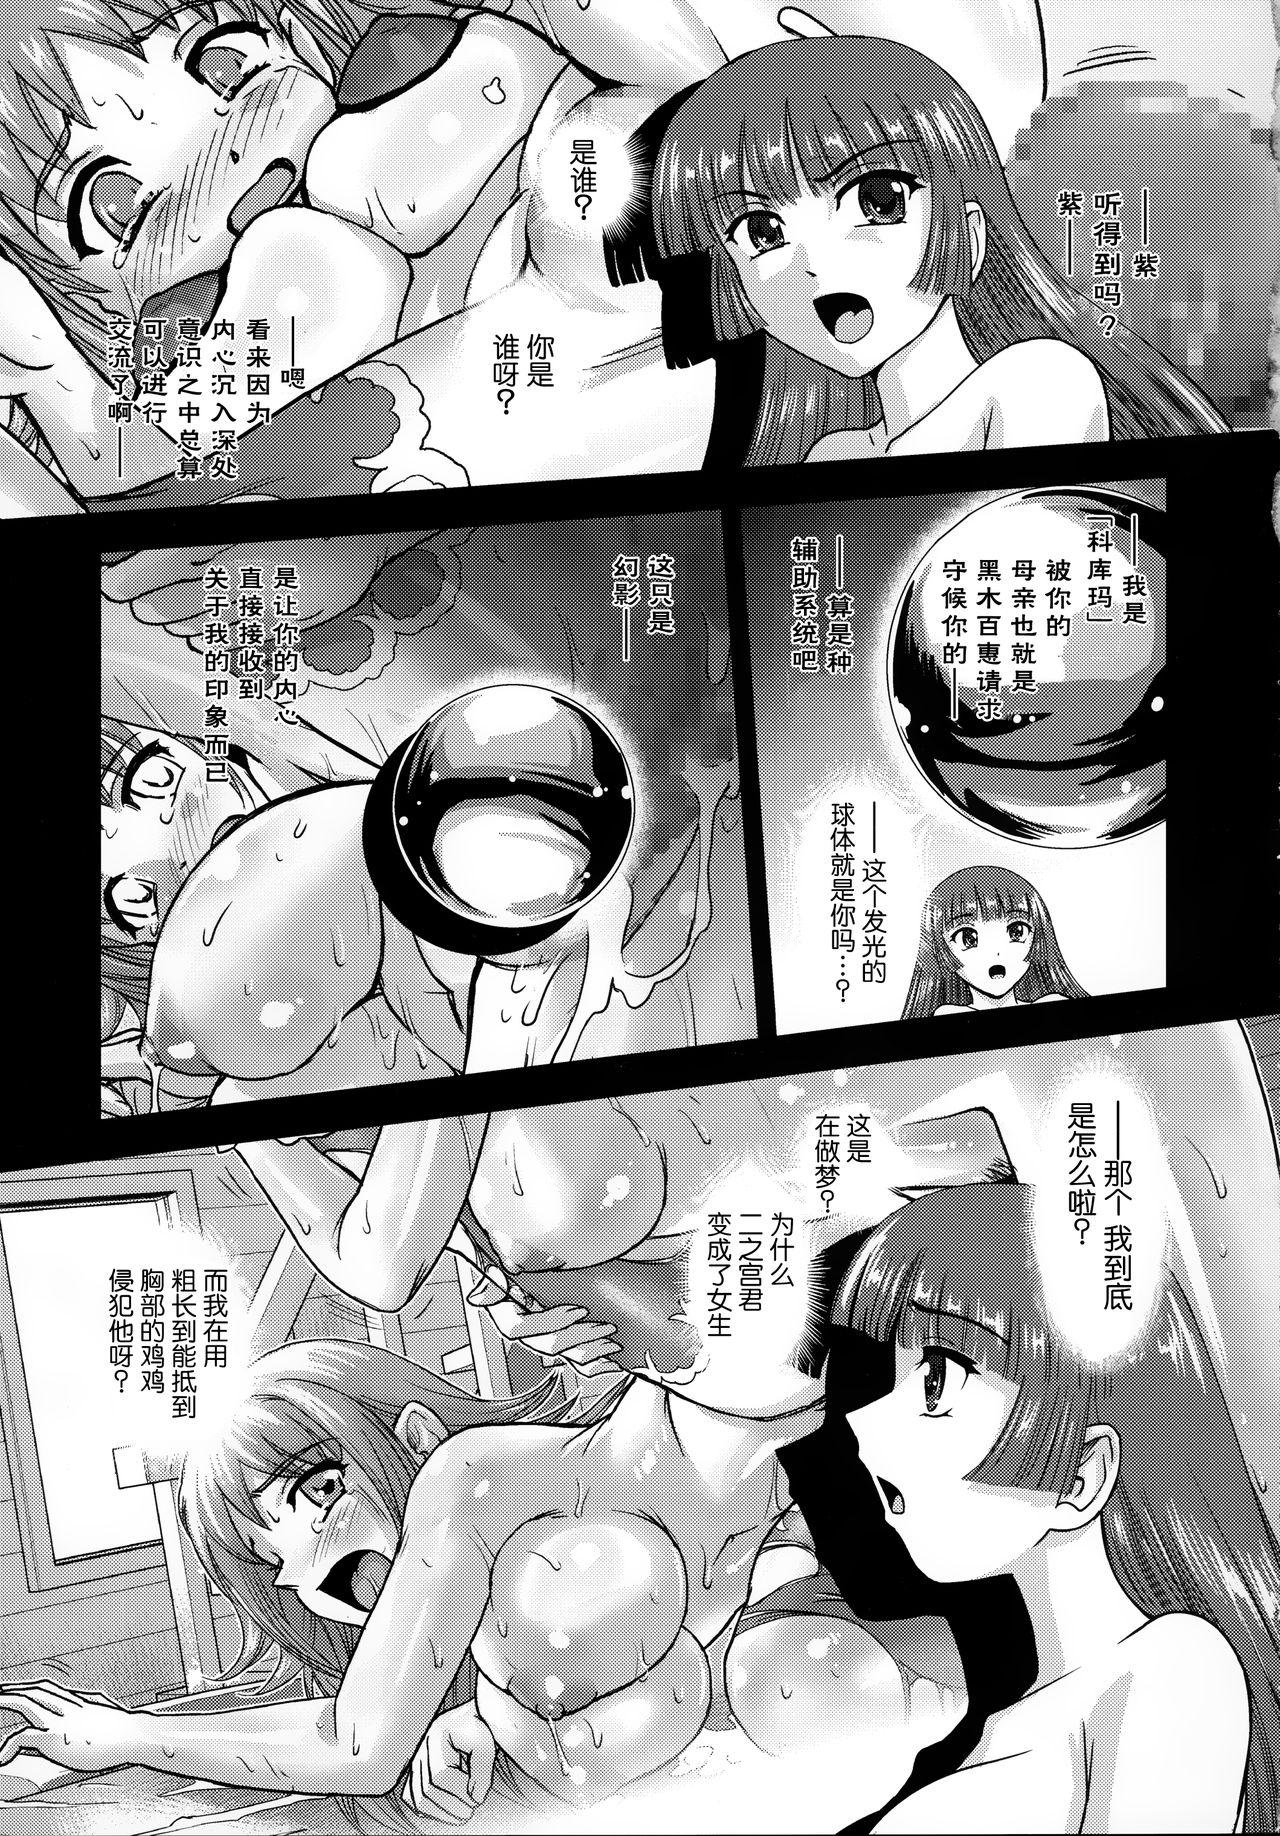 Bukkake (C95) [Behind Moon (Dulce-Q)] DR:II ep.7 ~Dulce Report~ | 达西报告II Ep.7 [Chinese] [鬼畜王汉化组] - Original Freckles - Page 5